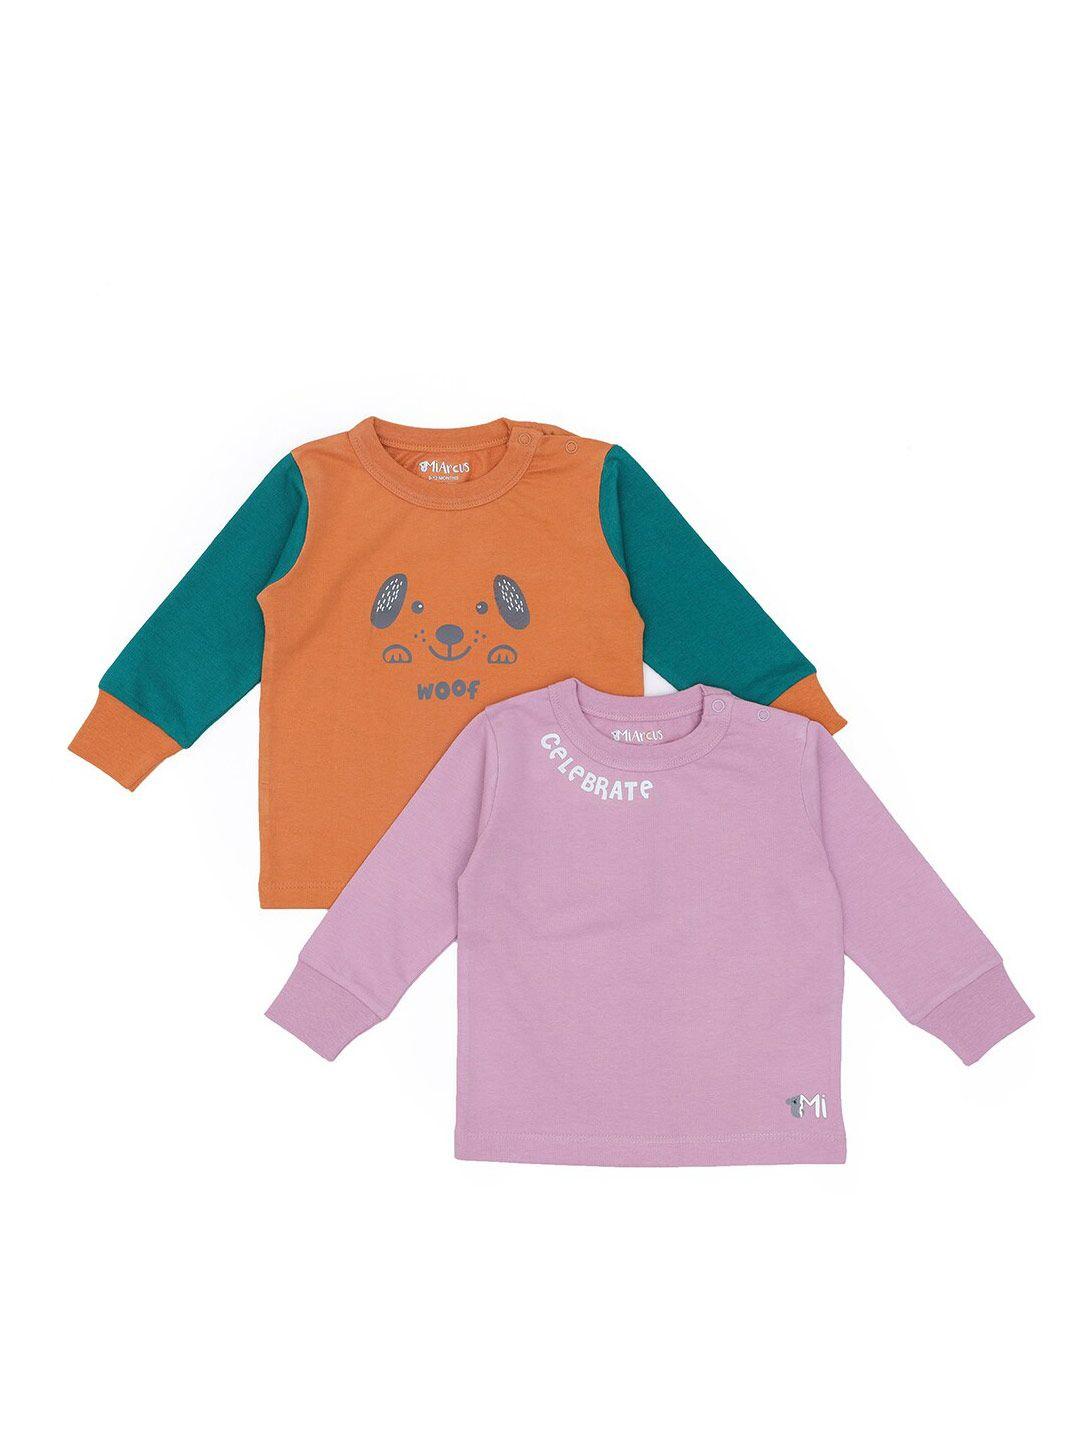 miarcus pack of 2 printed cotton pullover sweatshirts